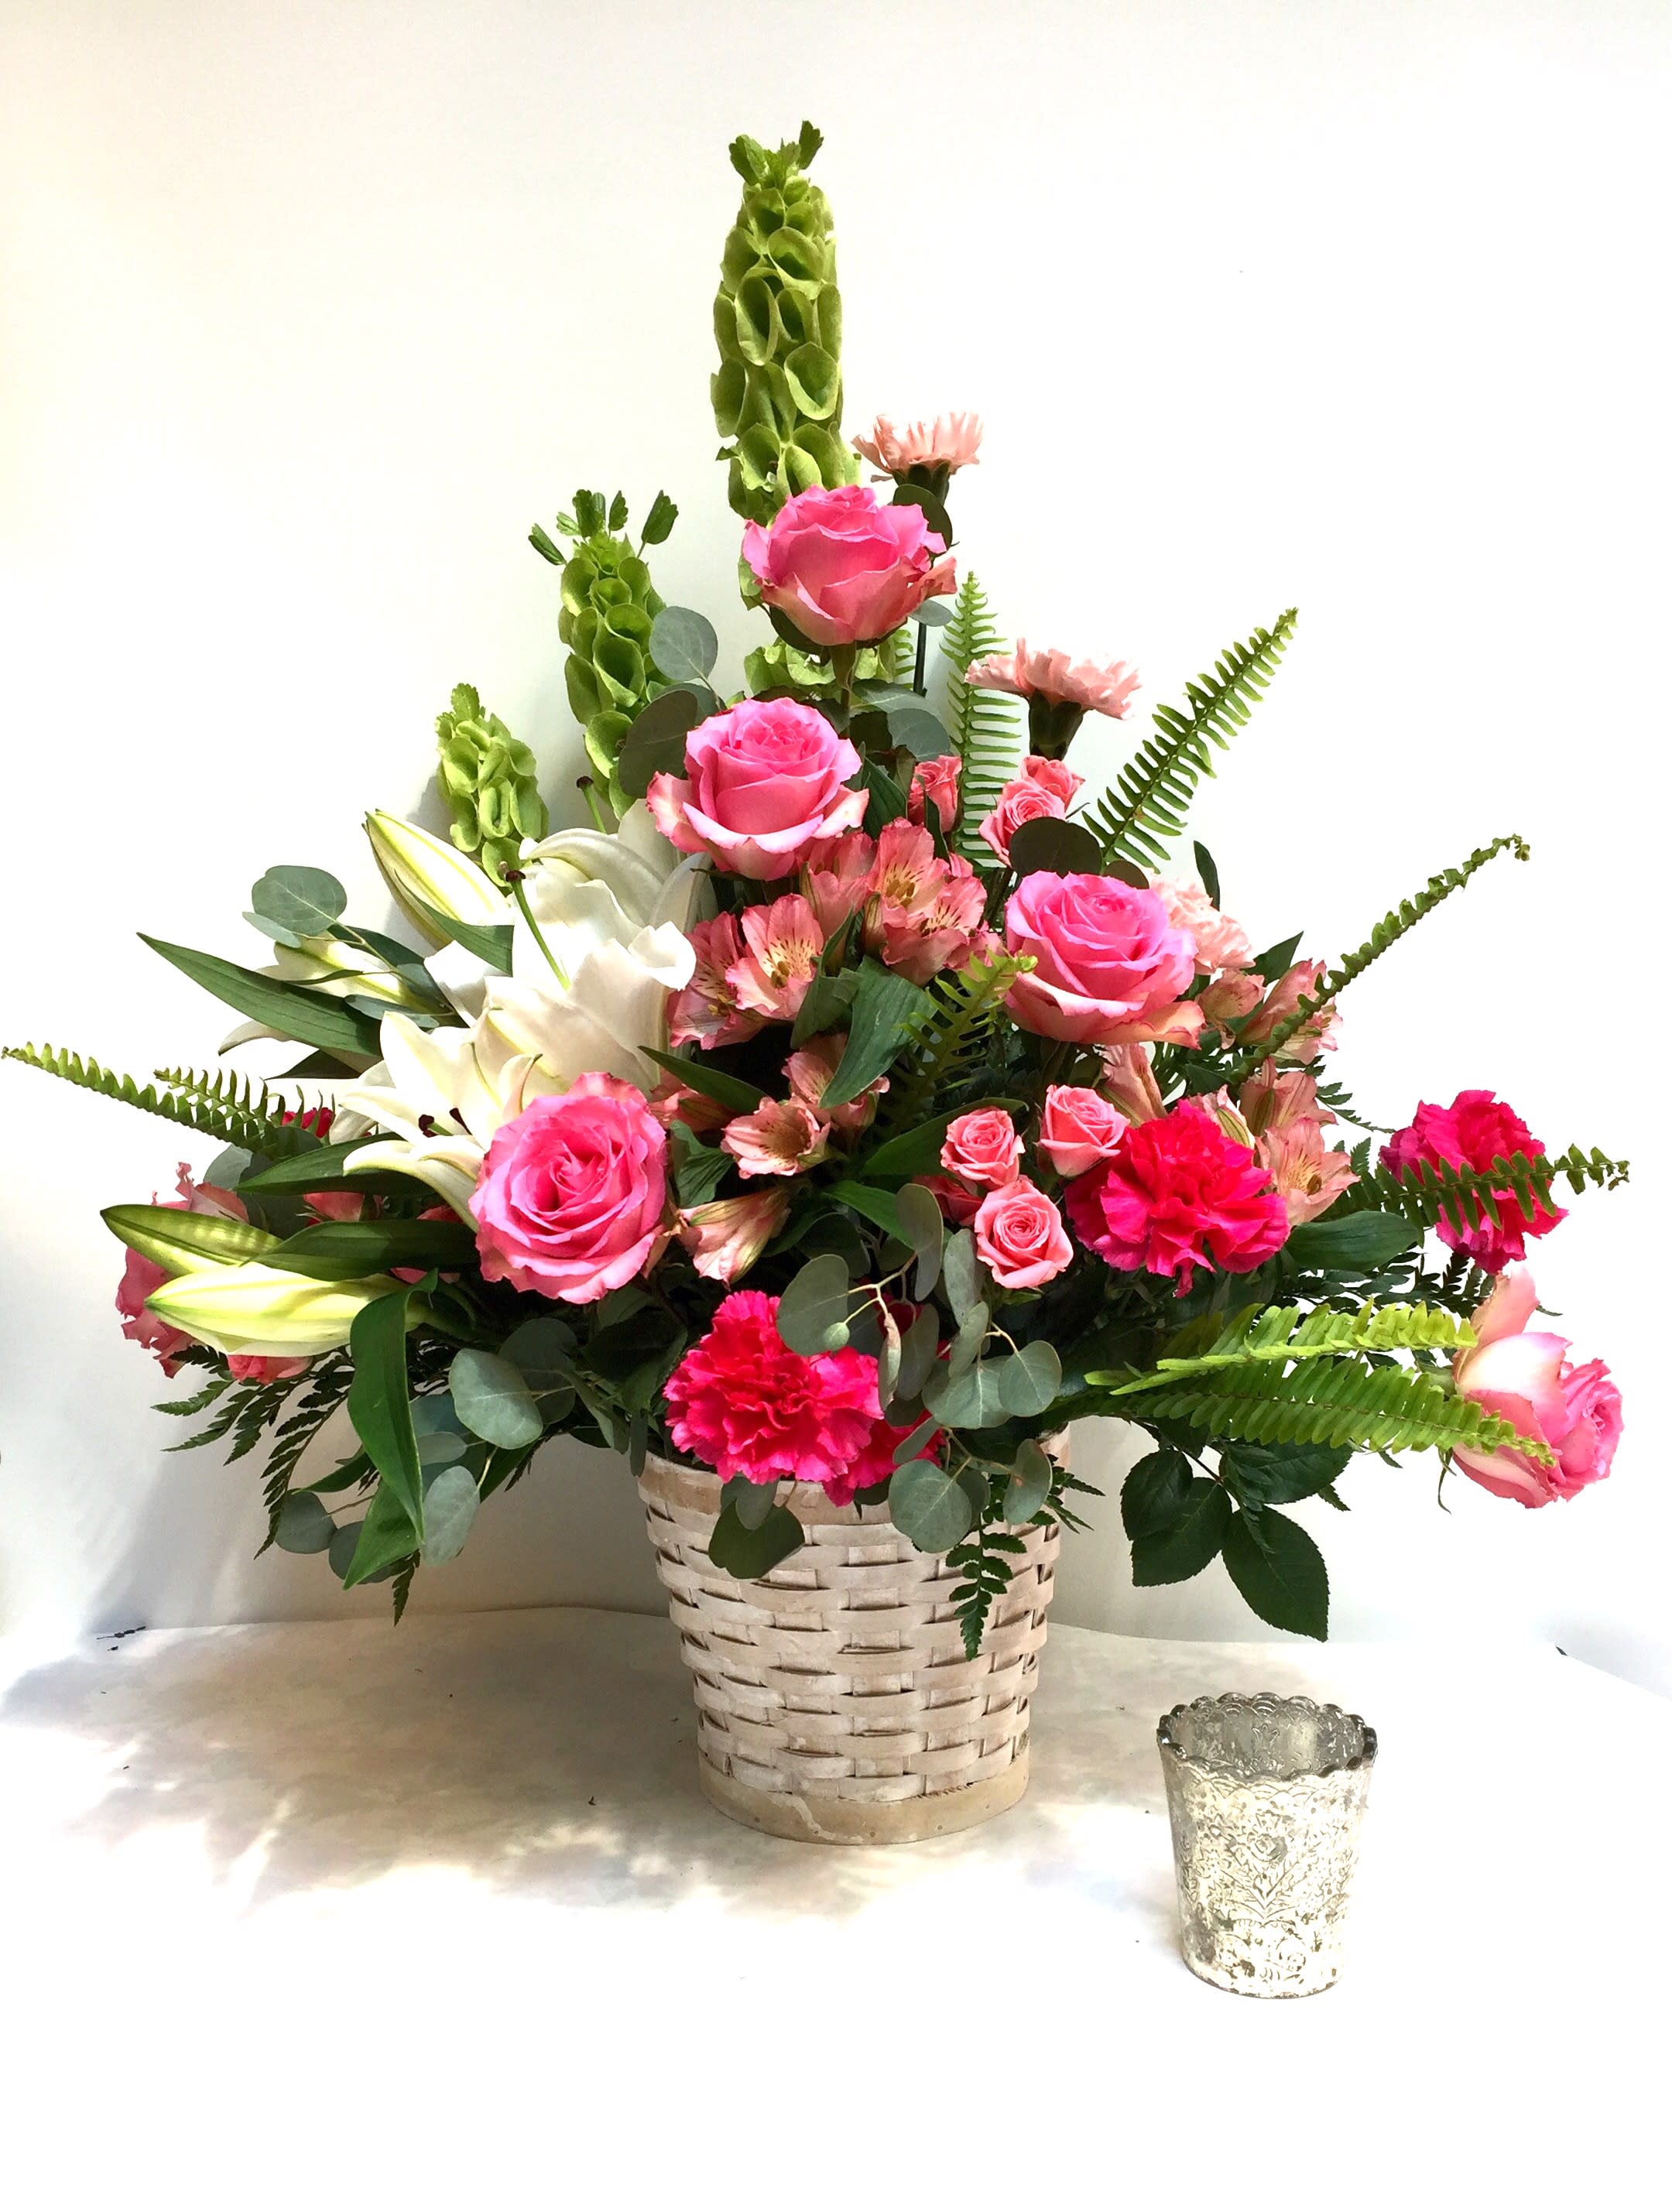 Loving Rememberance - Traditional triangular one sided sympathy basket filled with pinks and whites.  A perfect tribute for a life well lived.  HFS 201608-27